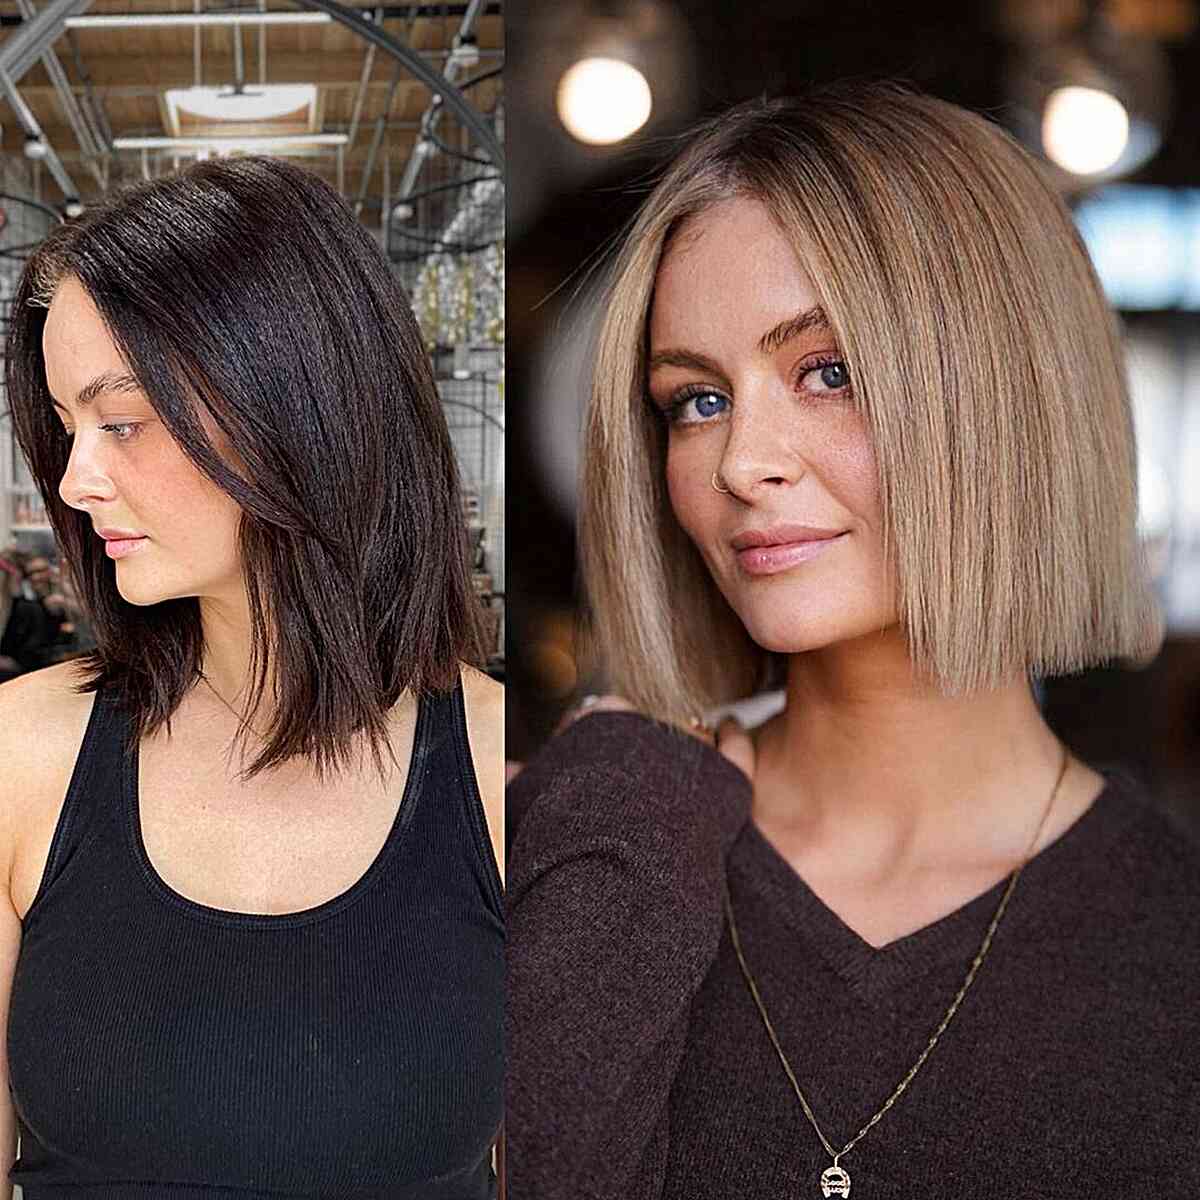 Dark Blonde Blunt One-Length Cut with No Bangs of women in their 30s